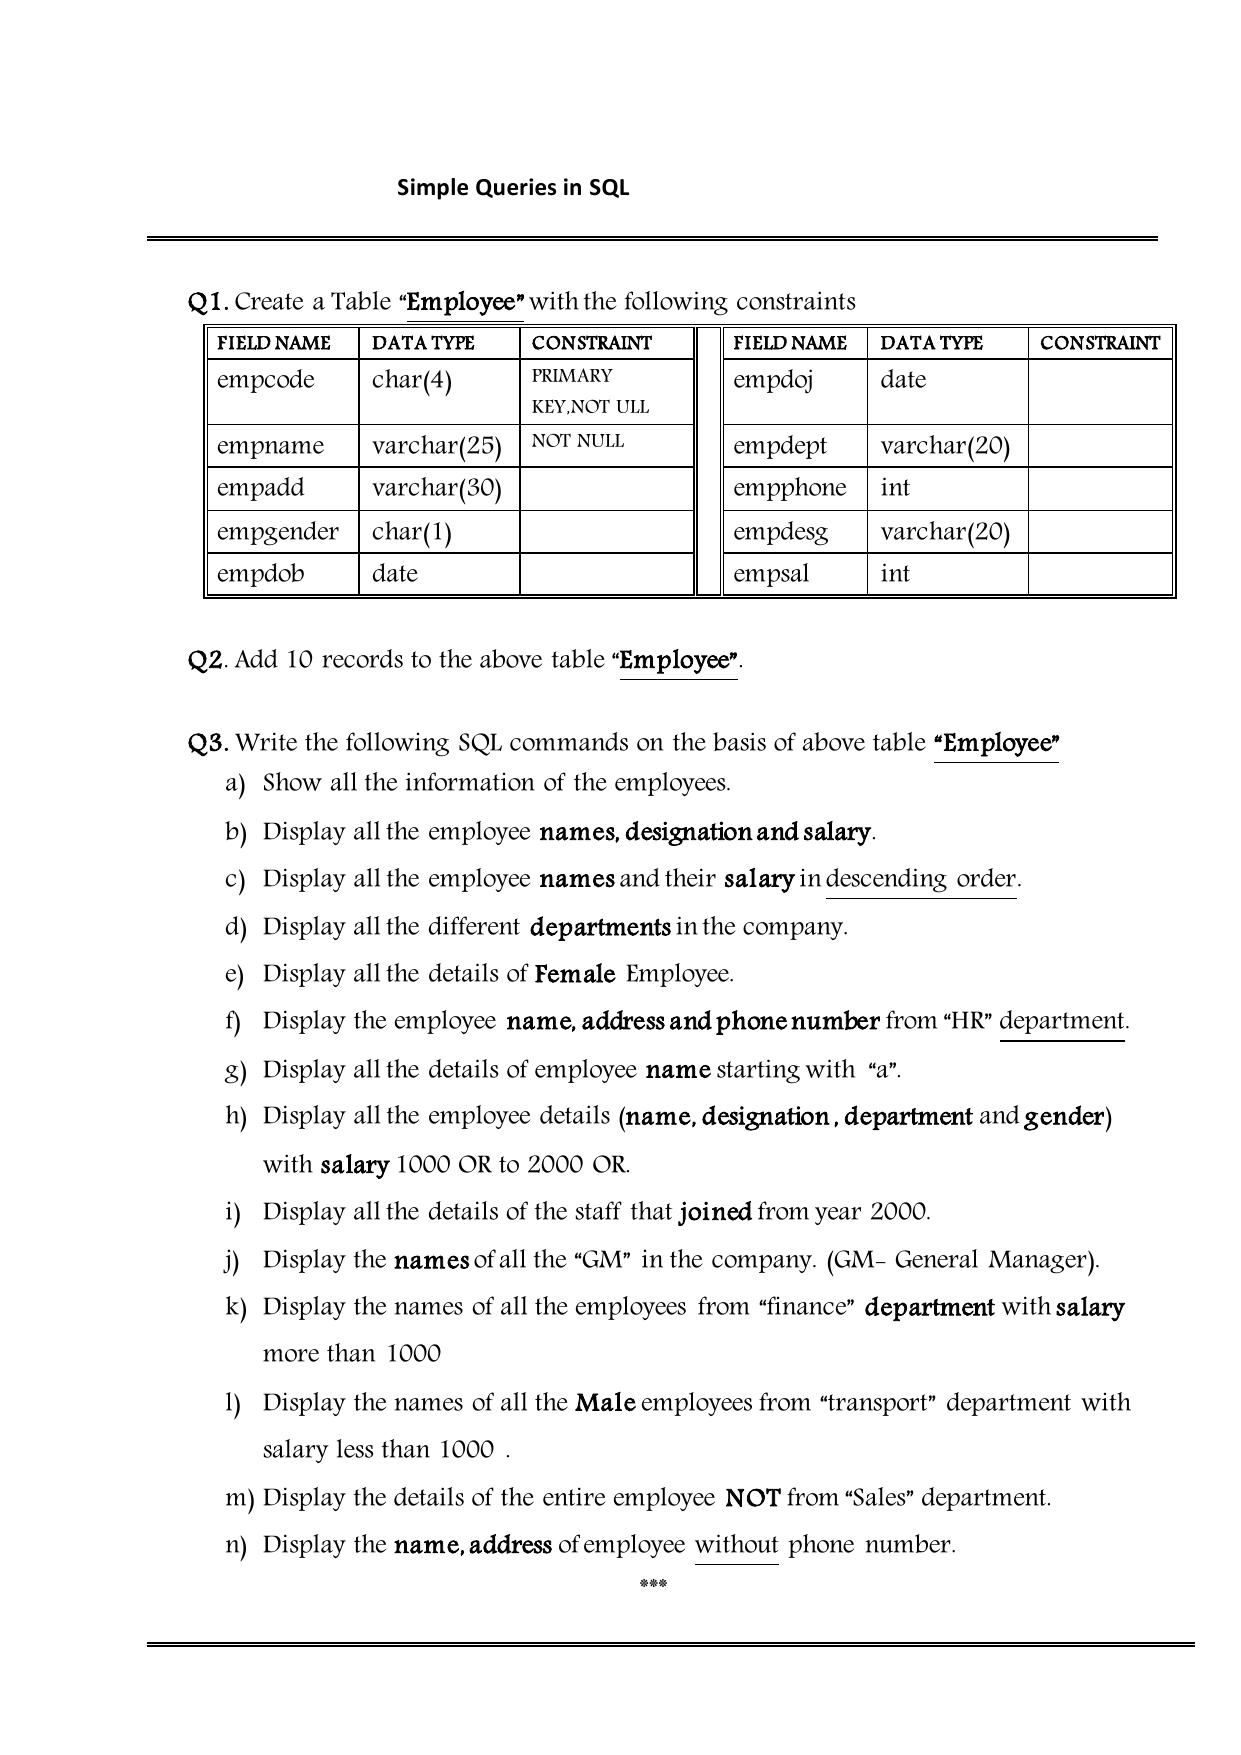 CBSE Worksheets for Class 11 Information Practices Functions in My SQL Assignment 2 - Page 1